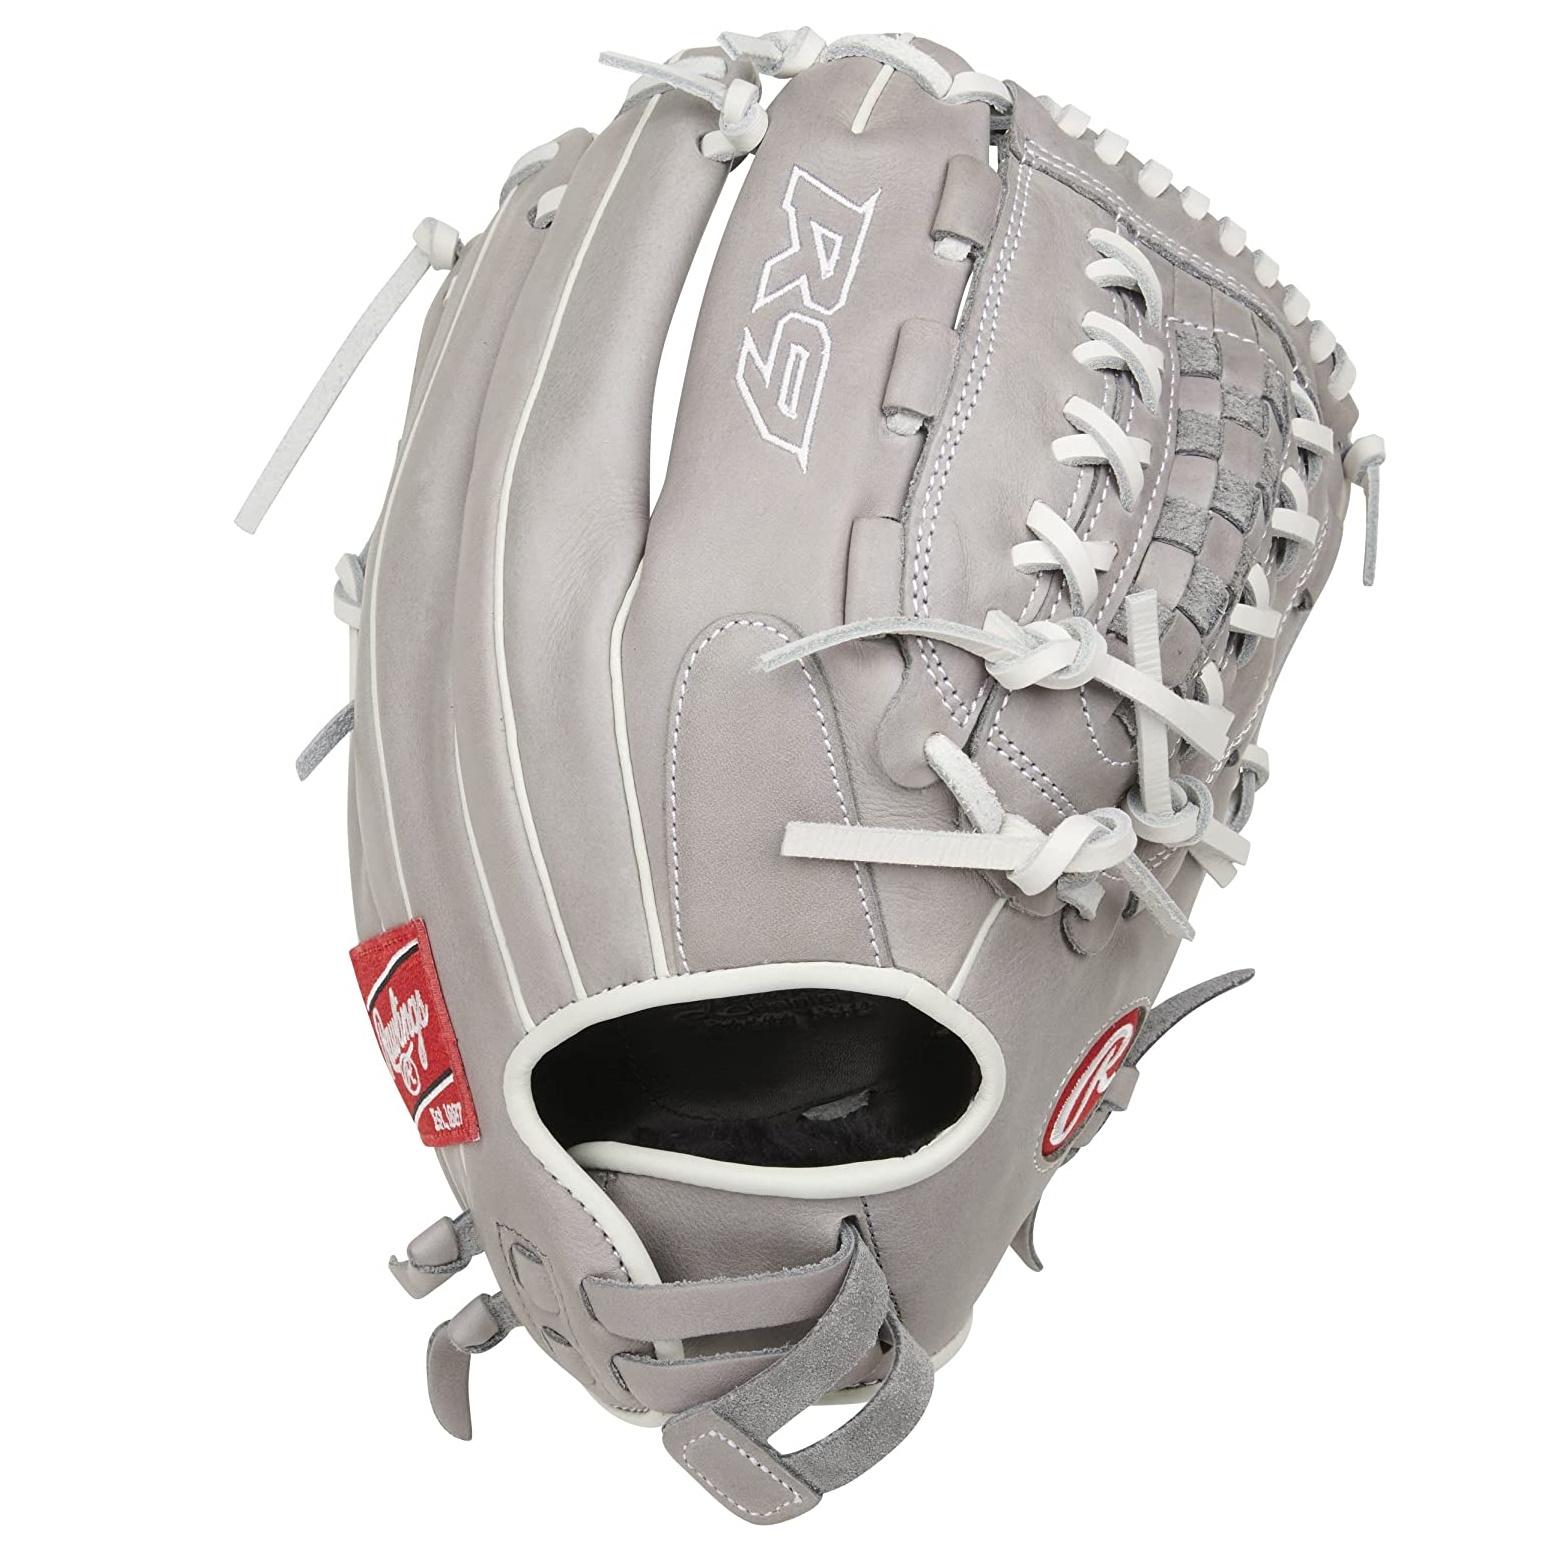 rawlings-r9-series-fastpitch-softball-glove-double-lace-basket-web-12-5-inch-right-hand-throw R9SB125-18G-RightHandThrow Rawlings  The all new R9 Series softball gloves are the best gloves